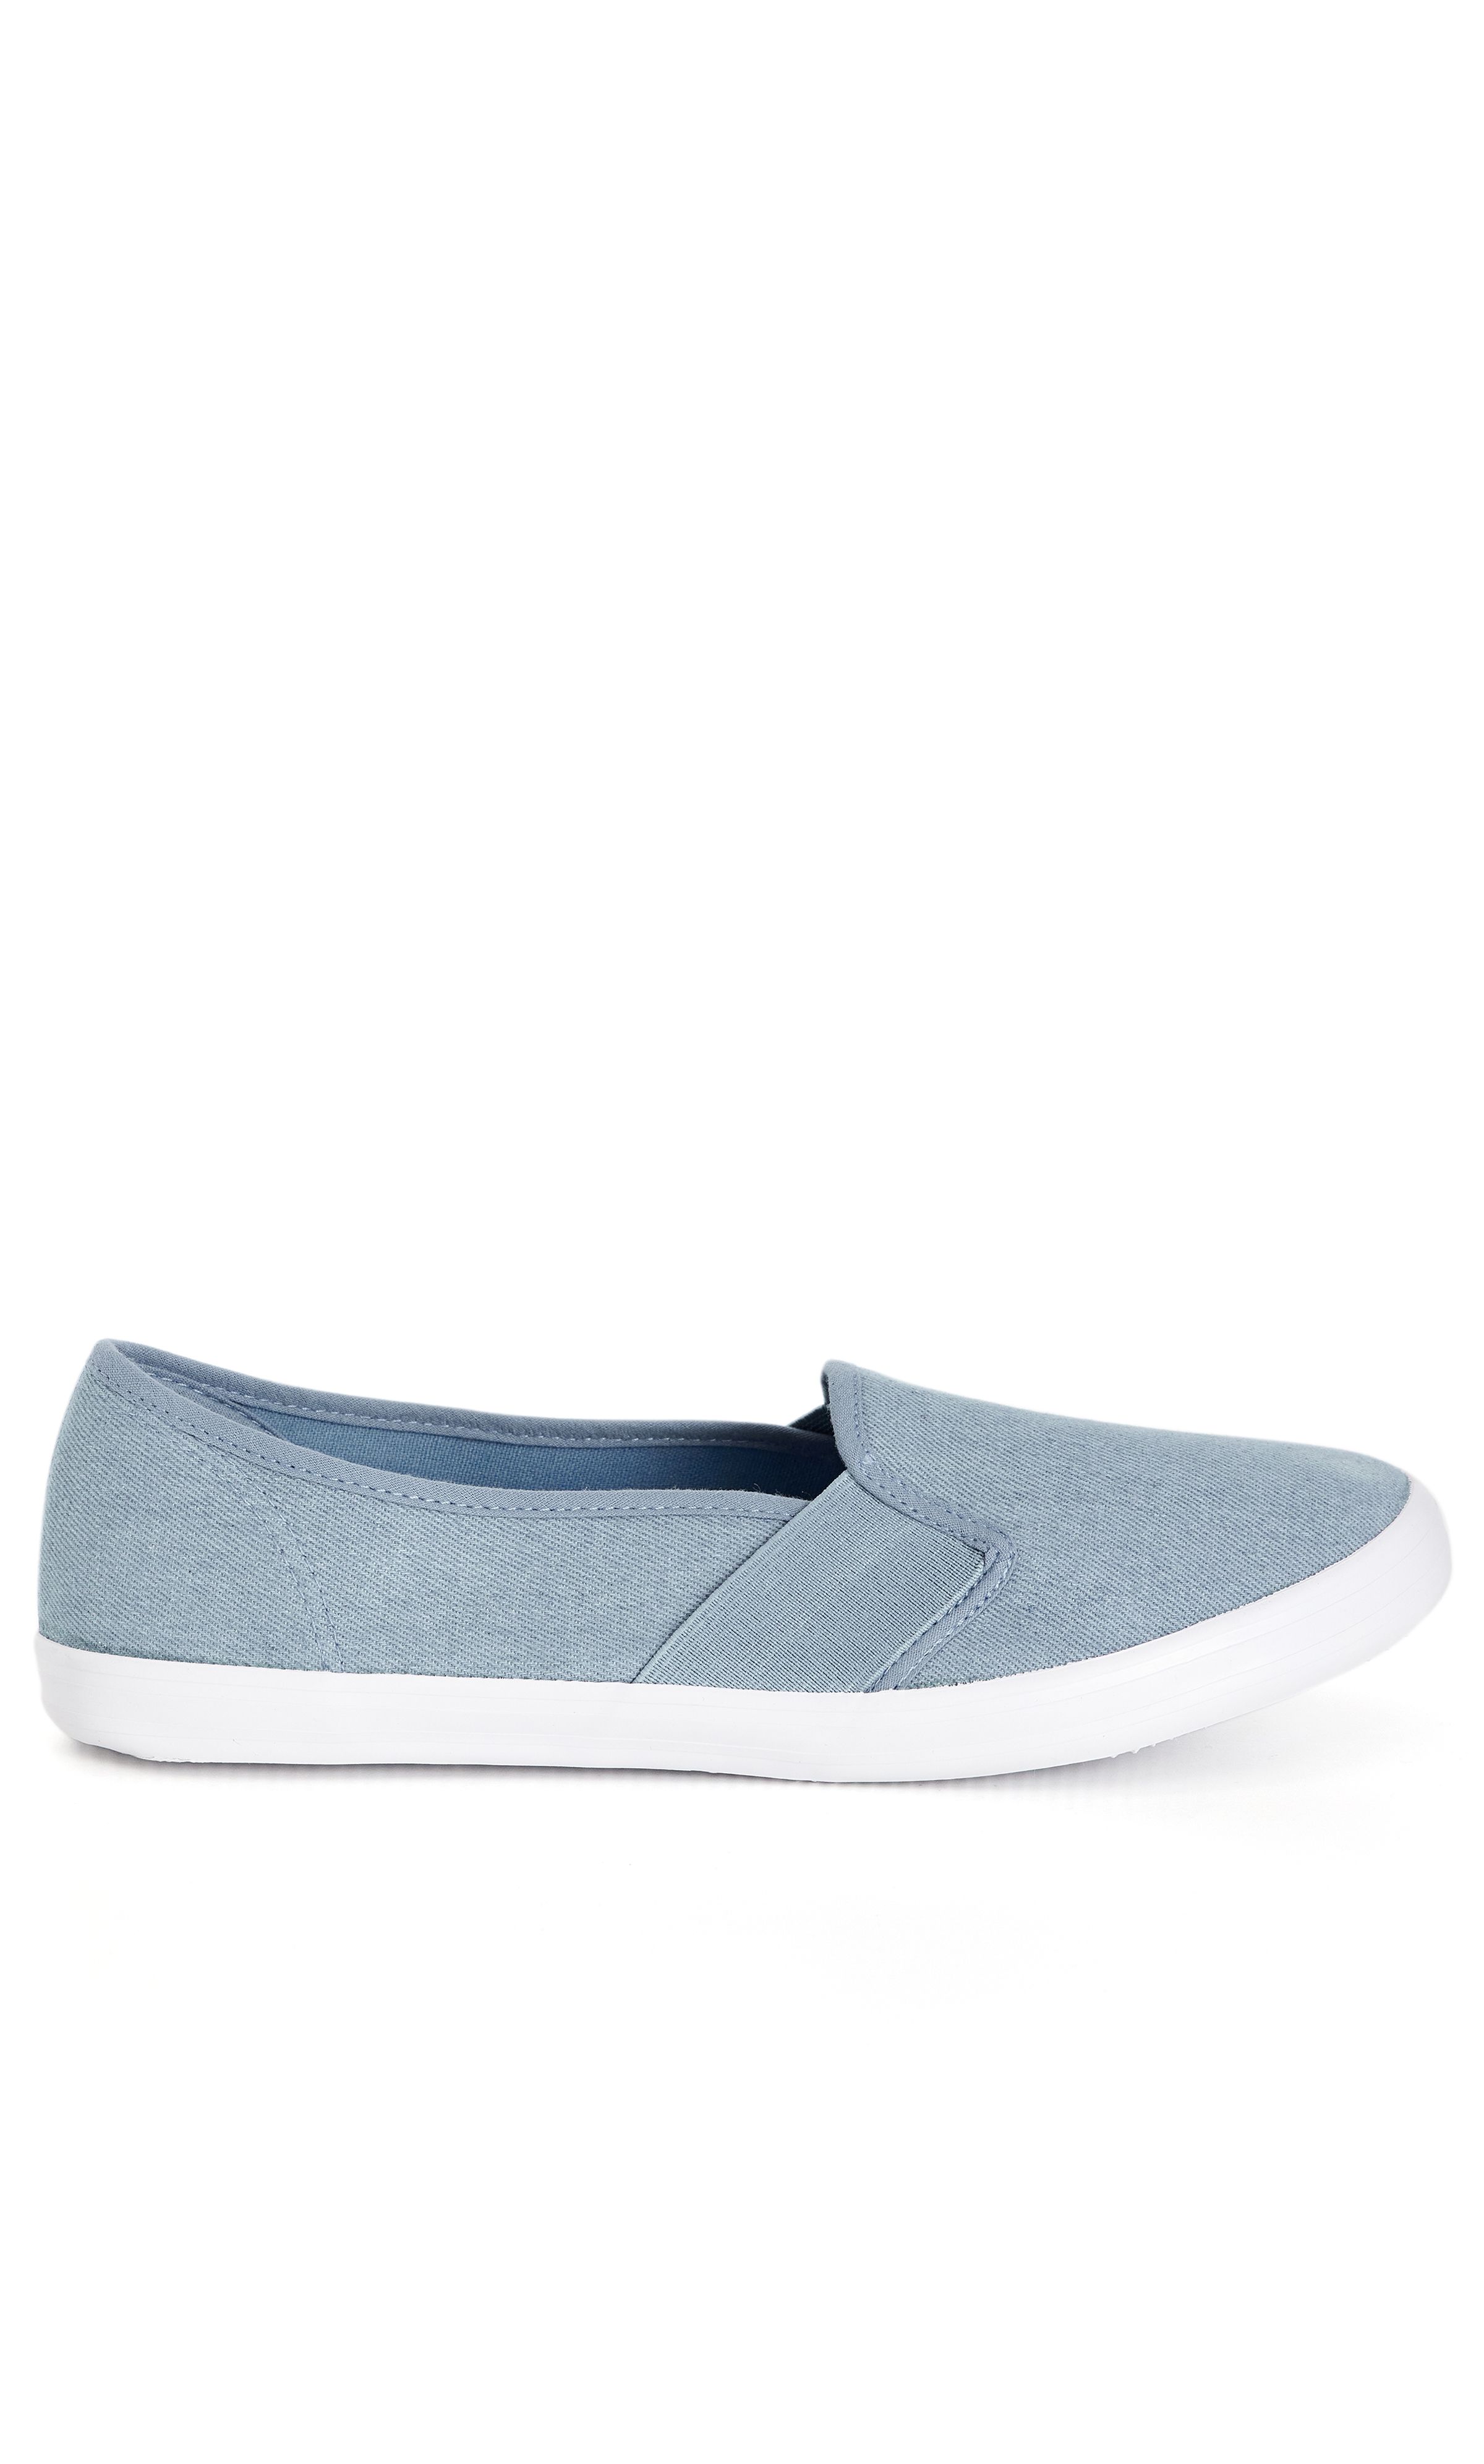 Our Denim Skater is a laidback casual staple, perfect for those off-duty days. Offering a chic denim fabrication and comfortable extra wide fit, this versatile pair will see you through shopping days, errand runs and coffee dates alike. Key Features Include: - Round toe - Elastic side gussets - Denim upper - Slip on style - Contrast sole For a go-to weekend look, team with a crisp slogan tee and skinny jeans.